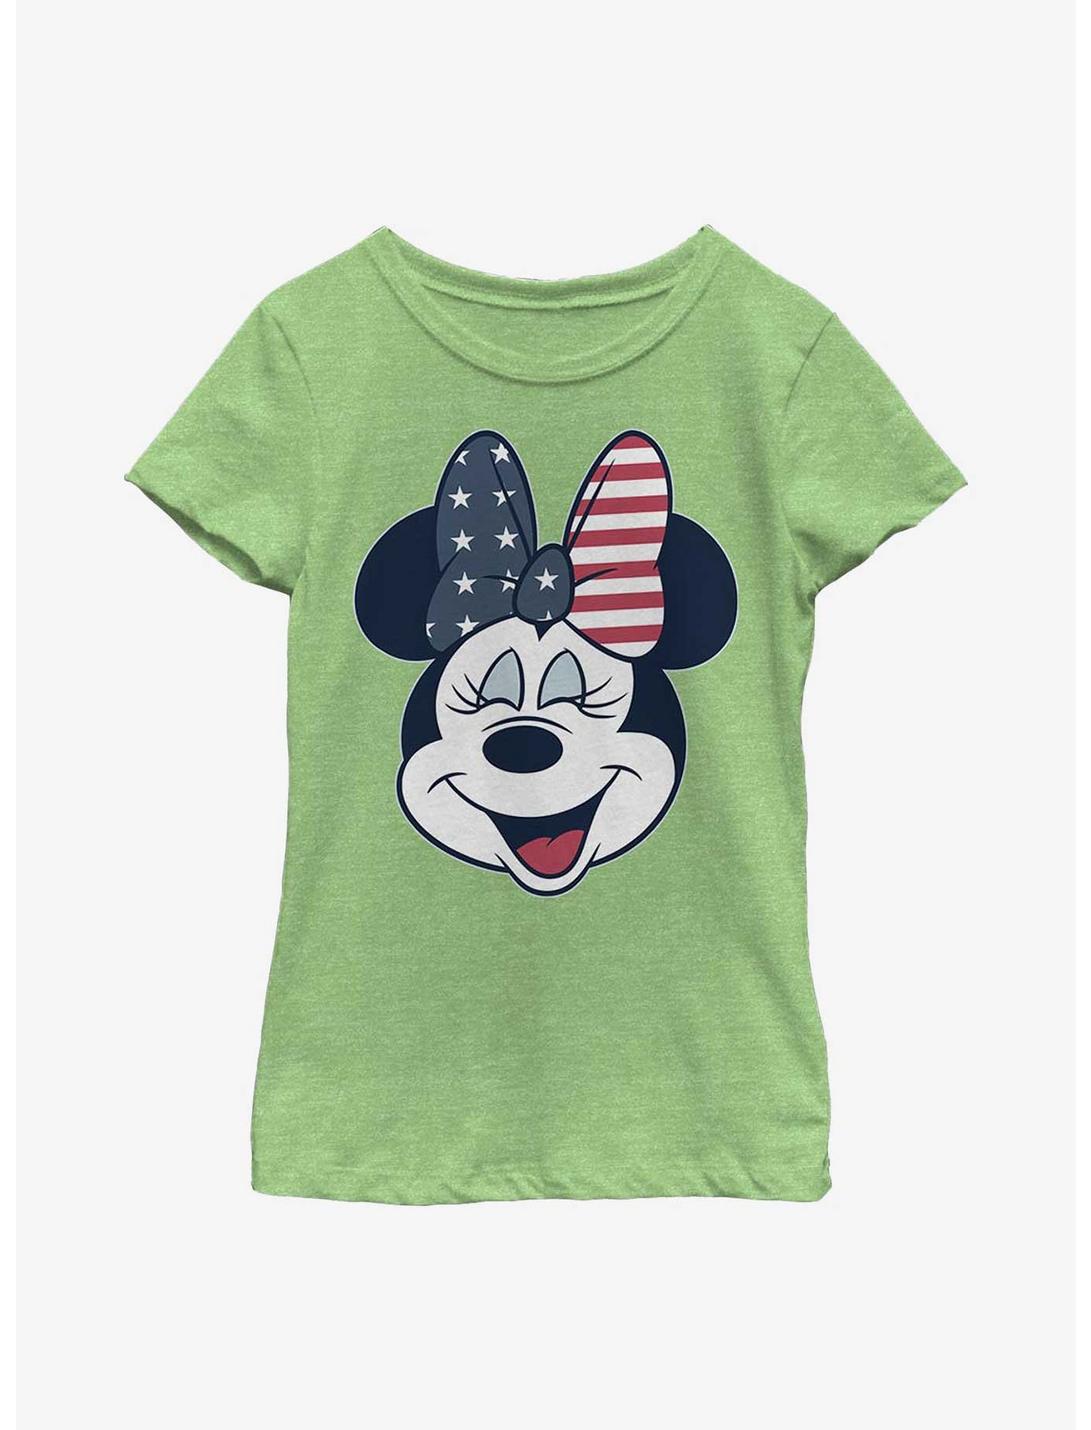 Disney Minnie Mouse American Bow Youth Girls T-Shirt, GRN APPLE, hi-res